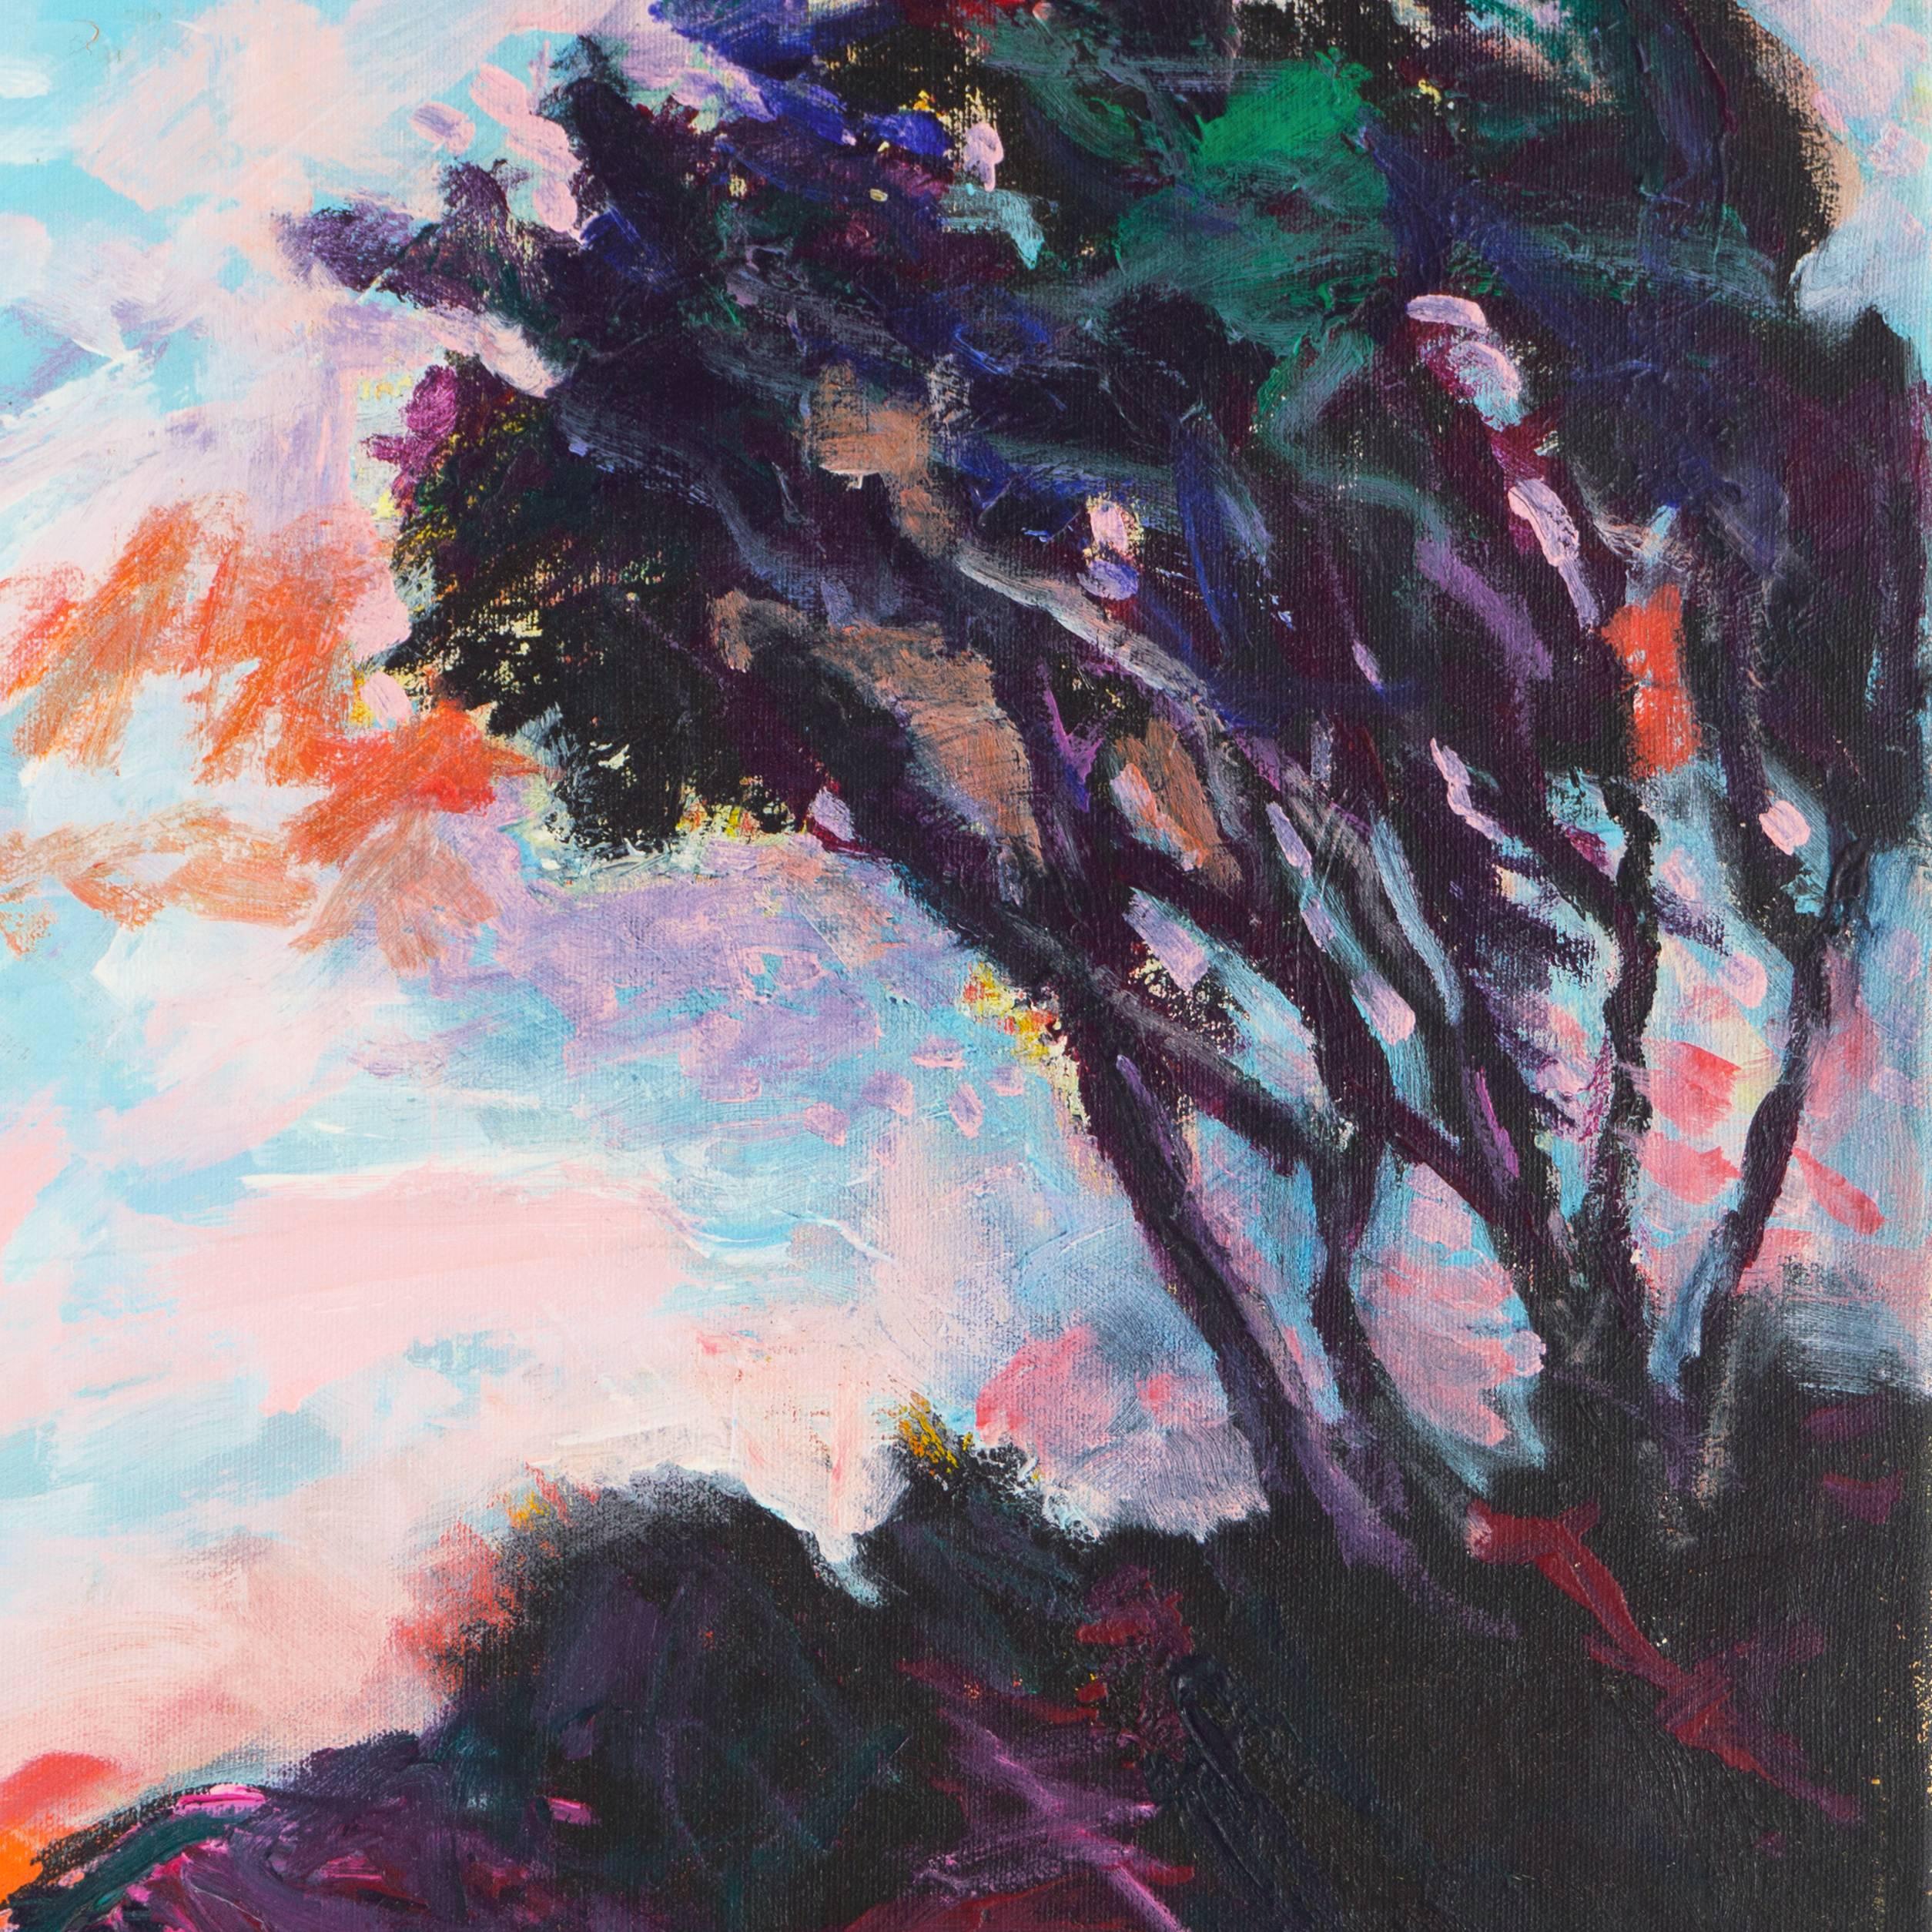 Signed lower right 'Guzman' (Juan Guzman-Maldonado, born 1948) further signed on canvas verso and titled 'Laguna Hills' on attached label. 

An oil landscape showing a eucalyptus tree overlooking Ventura county at sunset. This Ventura based artistis